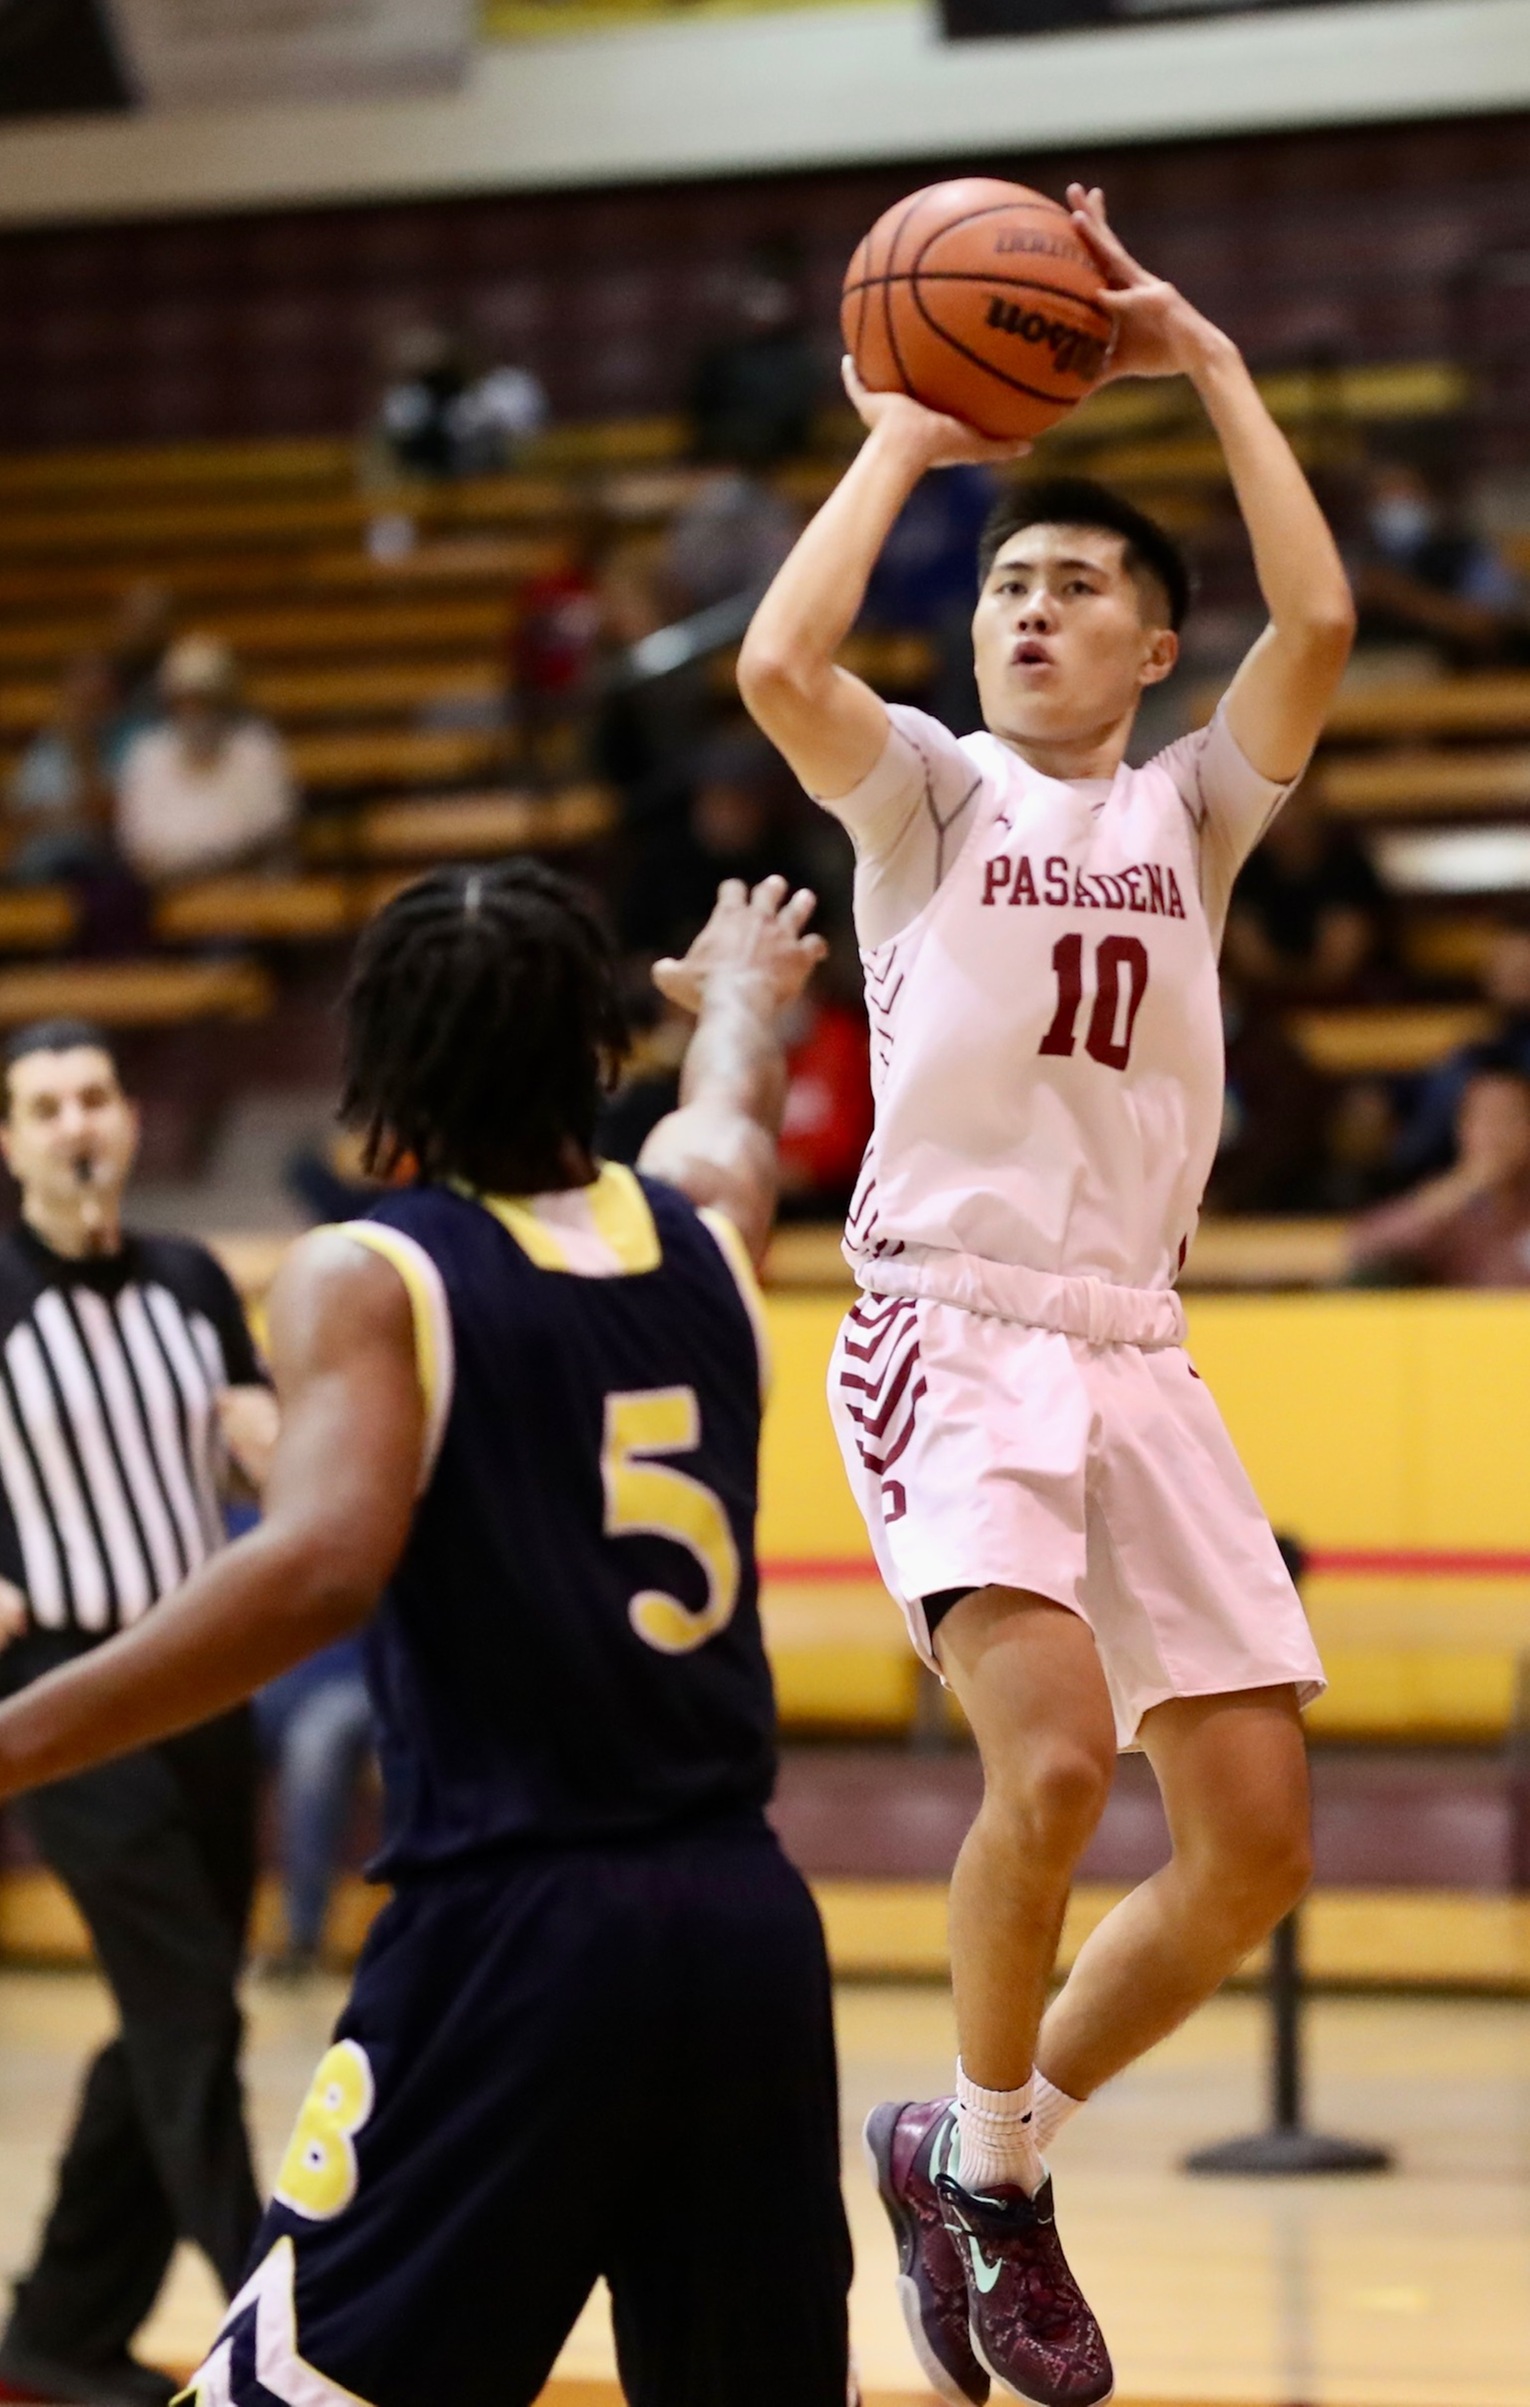 Brandon Torimaru takes a shot during PCC's home opener on Friday (photo by Michael Watkins).